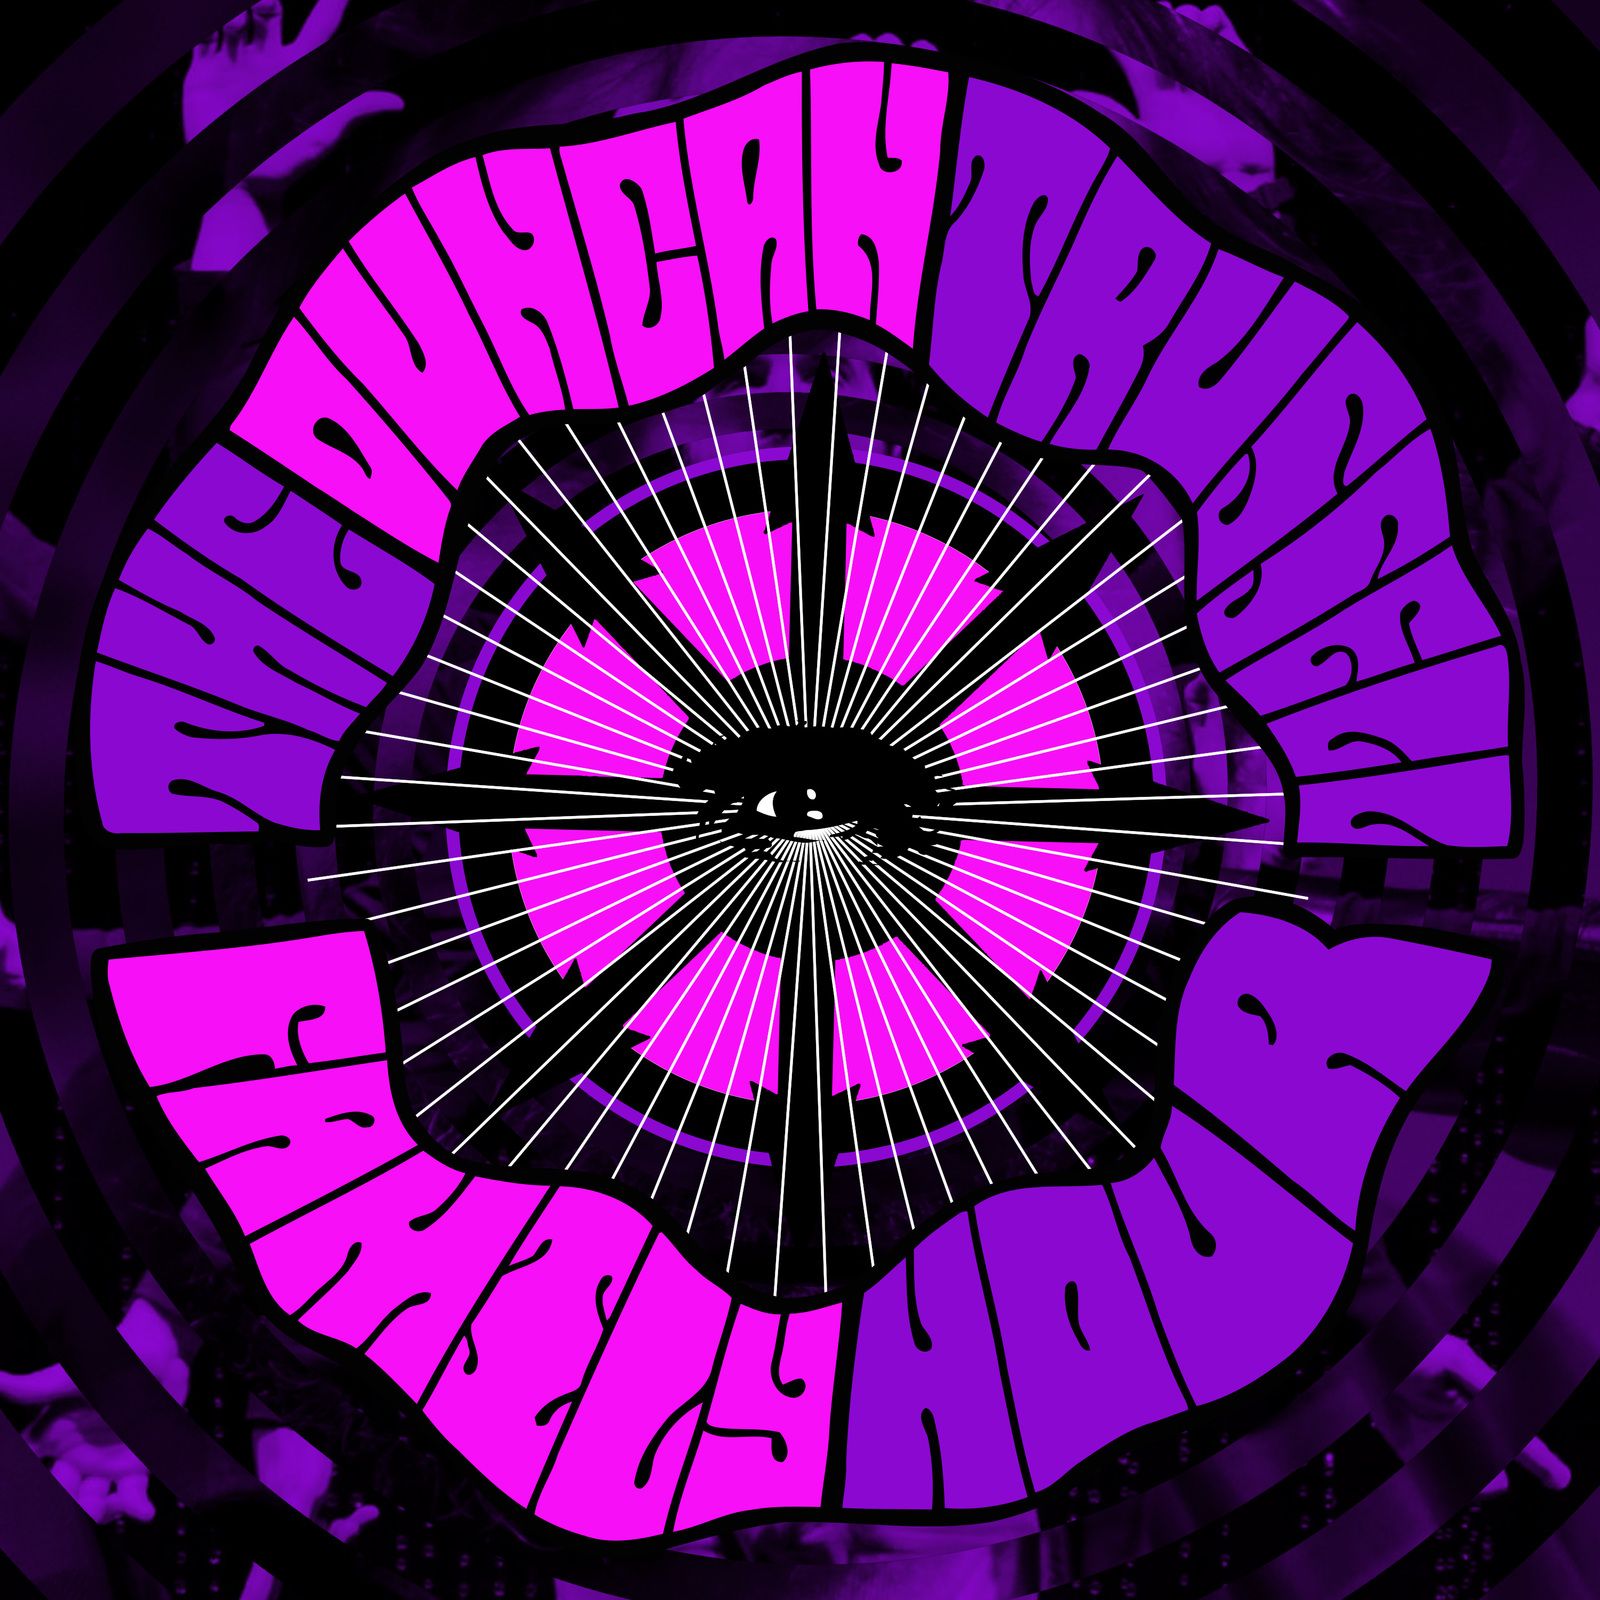 Duncan Trussell Got Addicted to Ketamine But Was Able to Kick It